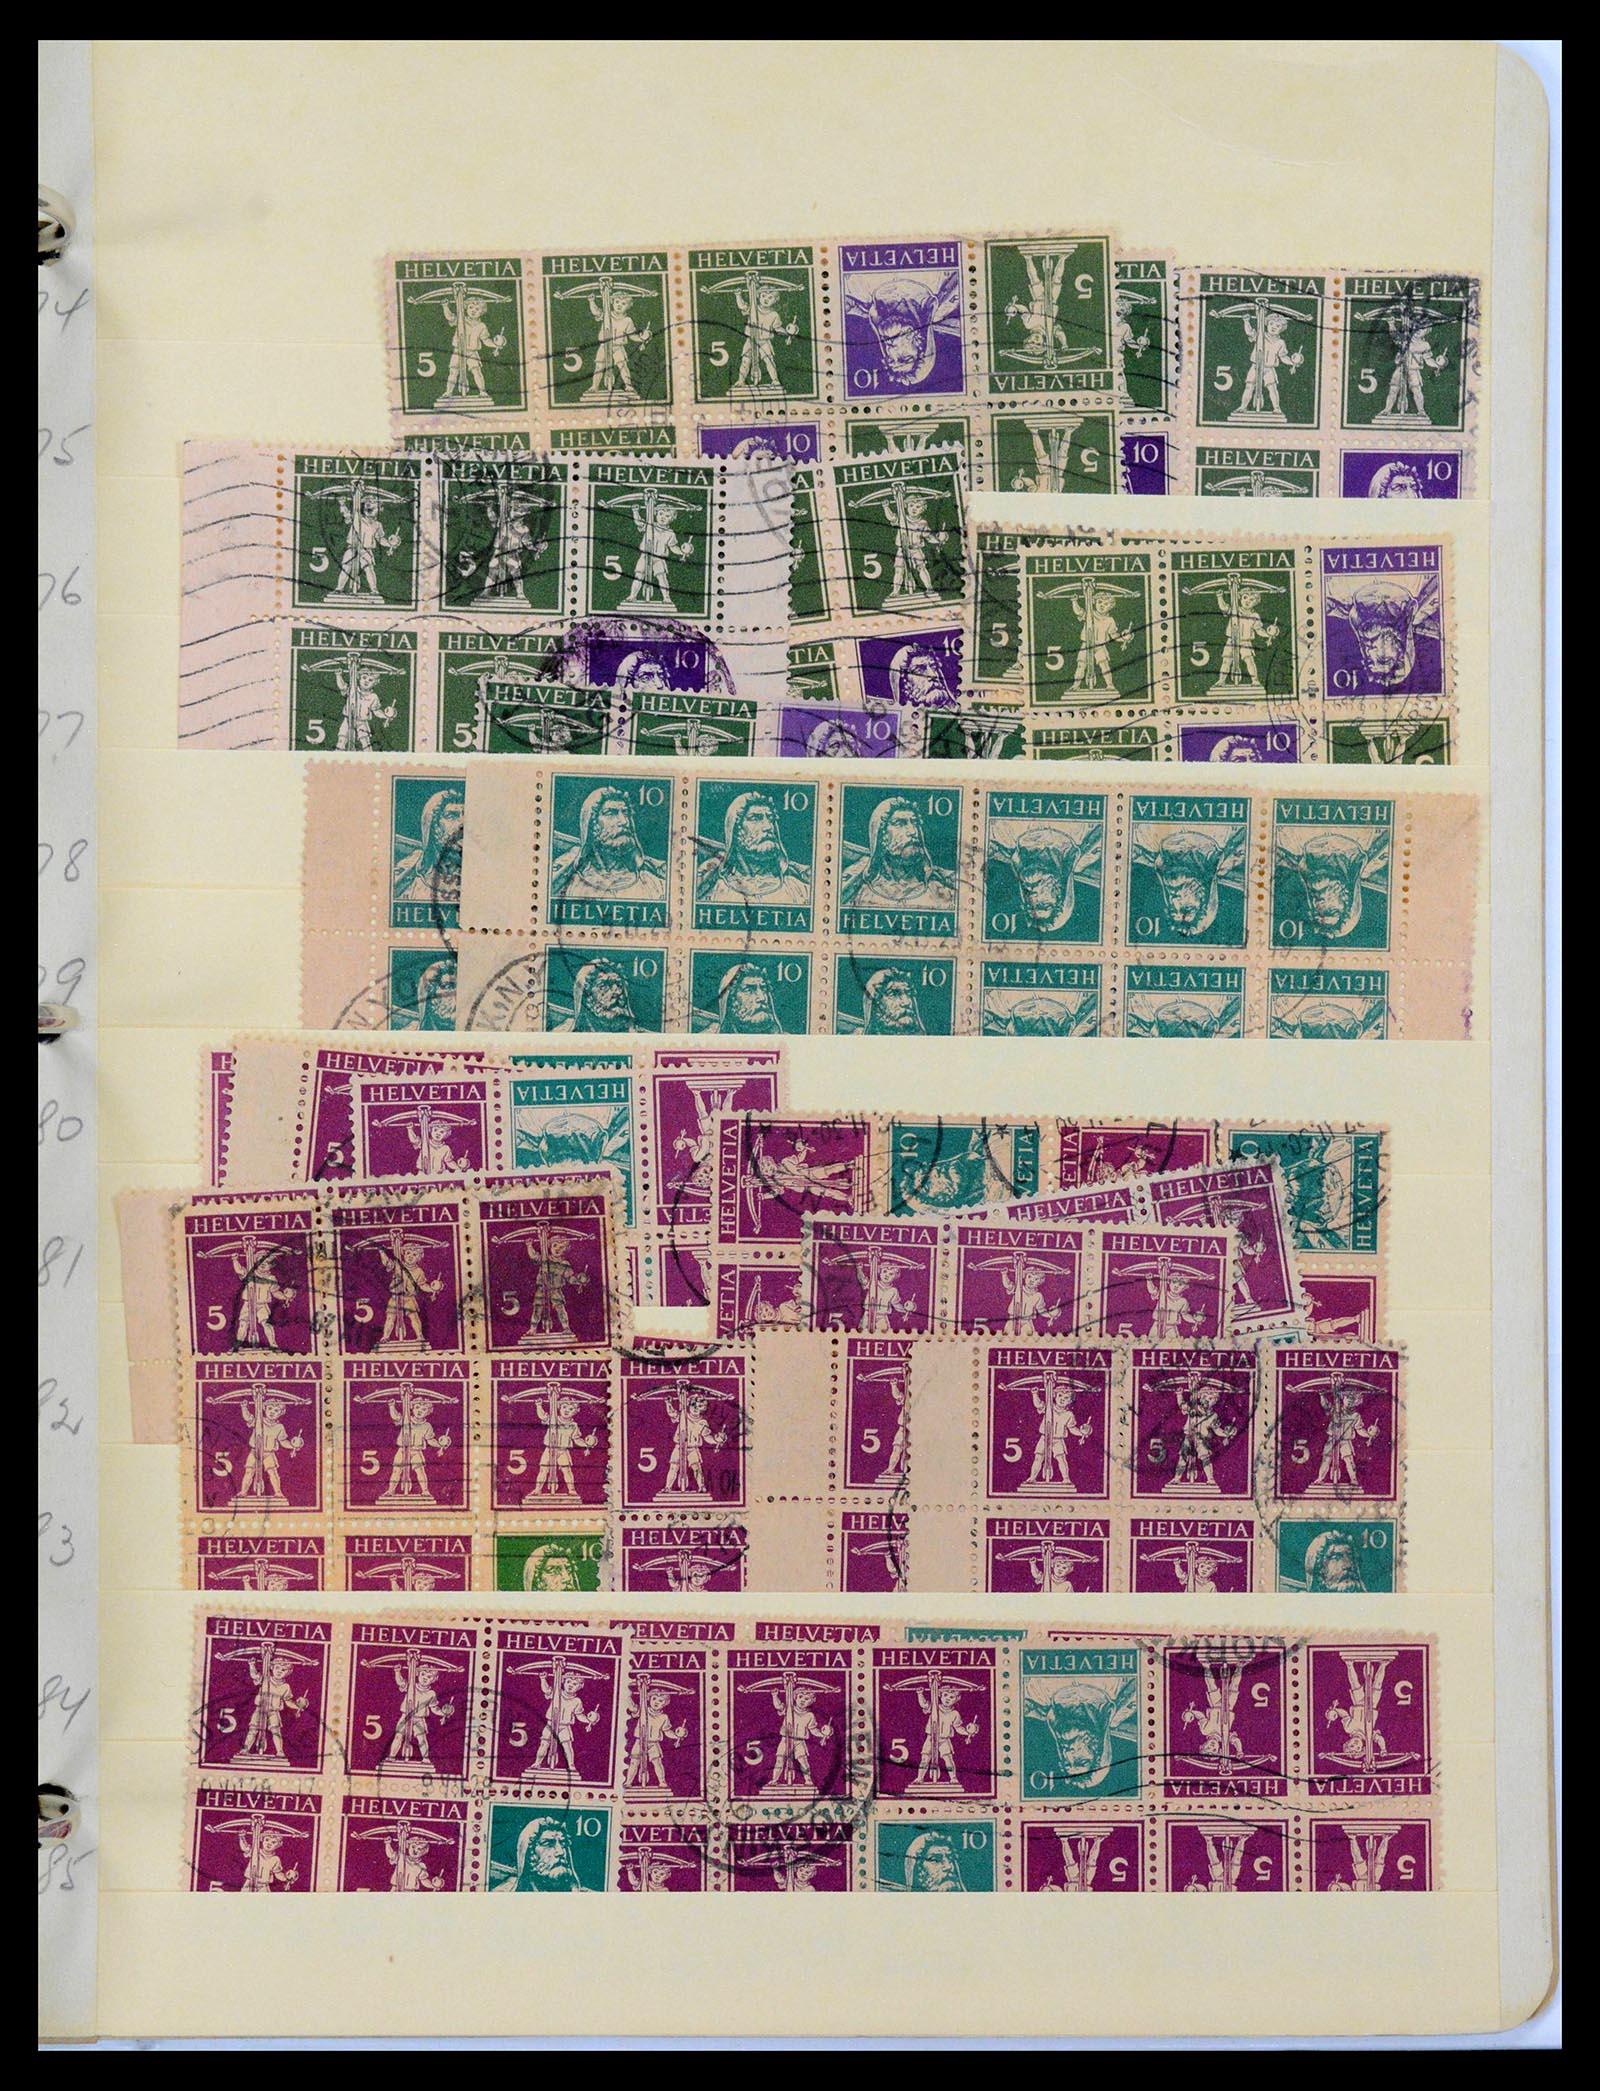 39092 0030 - Stamp collection 39092 Switzerland combinations 1908-2000.